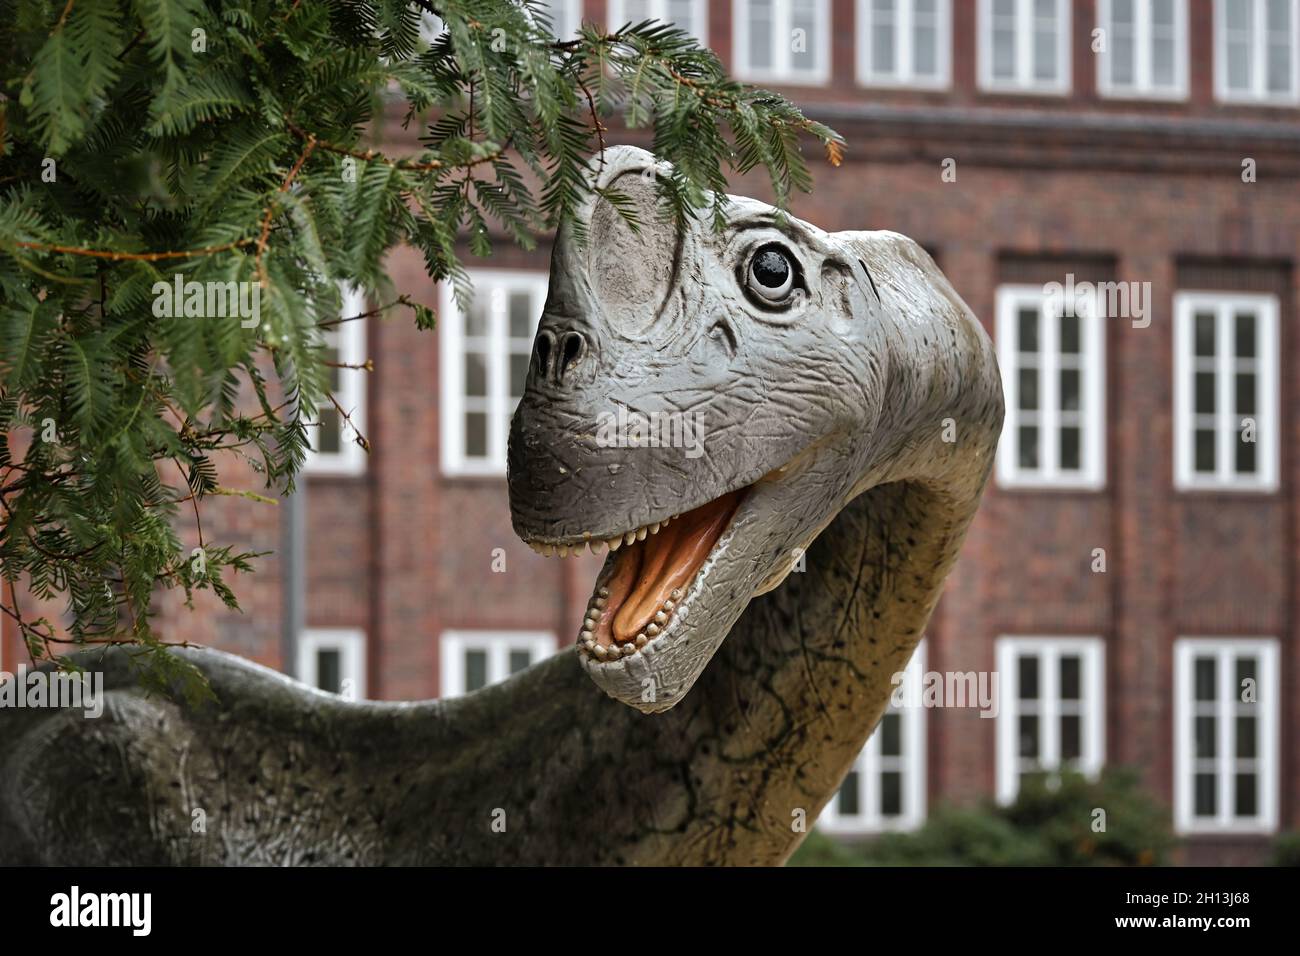 Dinosaur sculpture in front of the State Natural History Museum in Braunschweig, Germany. Scientific zoology museum, founded in 1754. Stock Photo